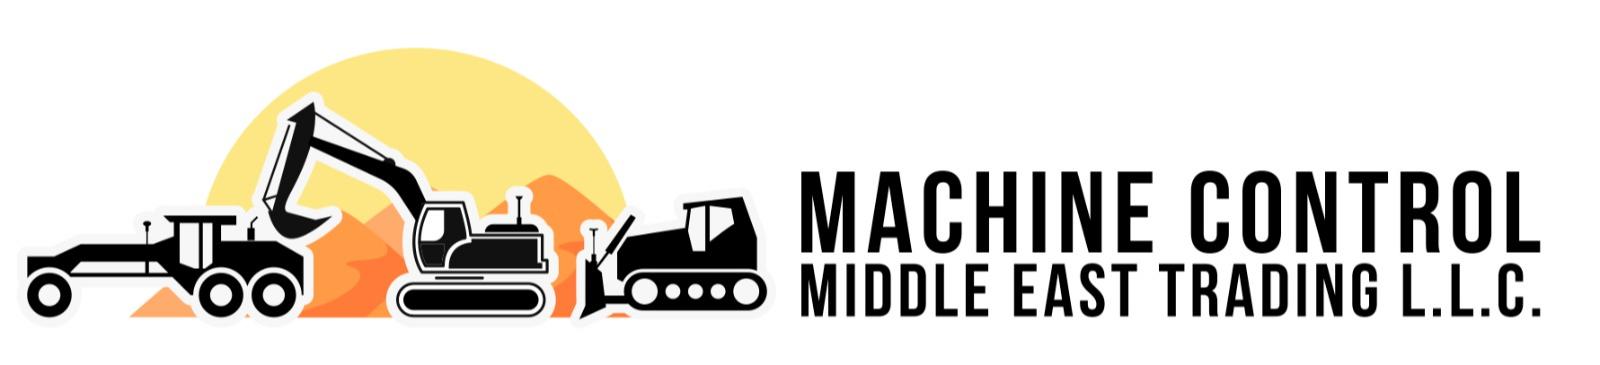 Machine Control Middle East Trading